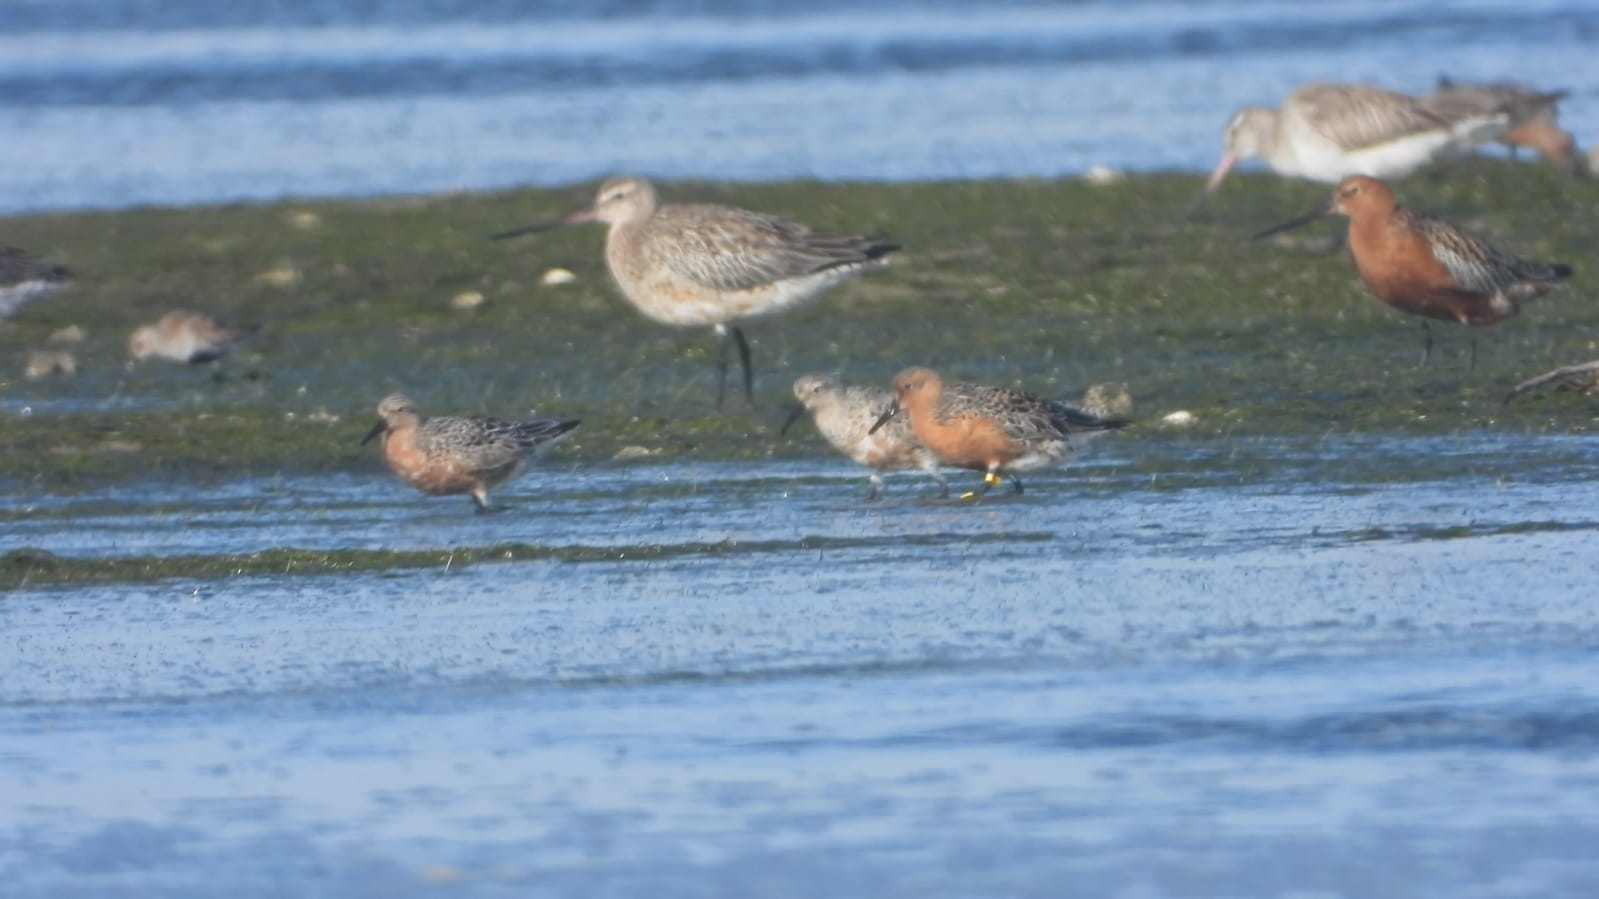 The reddest red knot on the right is named R’gueiba. The reddish color is their summer plumage. Photo Tim Oortwijn